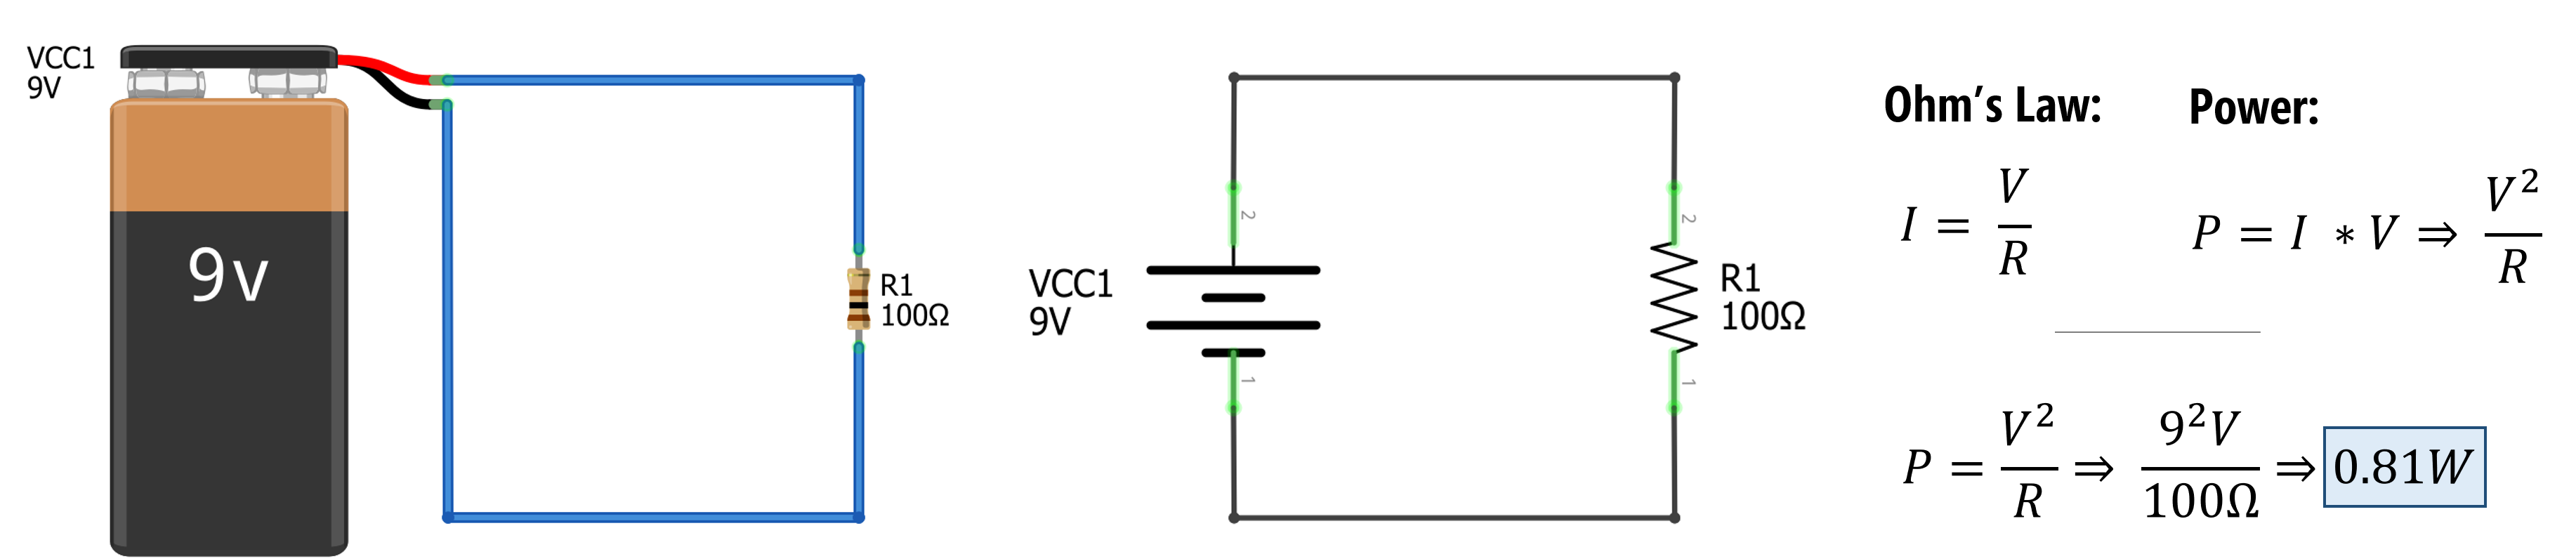 A simple circuit with a 9V battery and a 100Ω resistor showing the equation for power P = IV